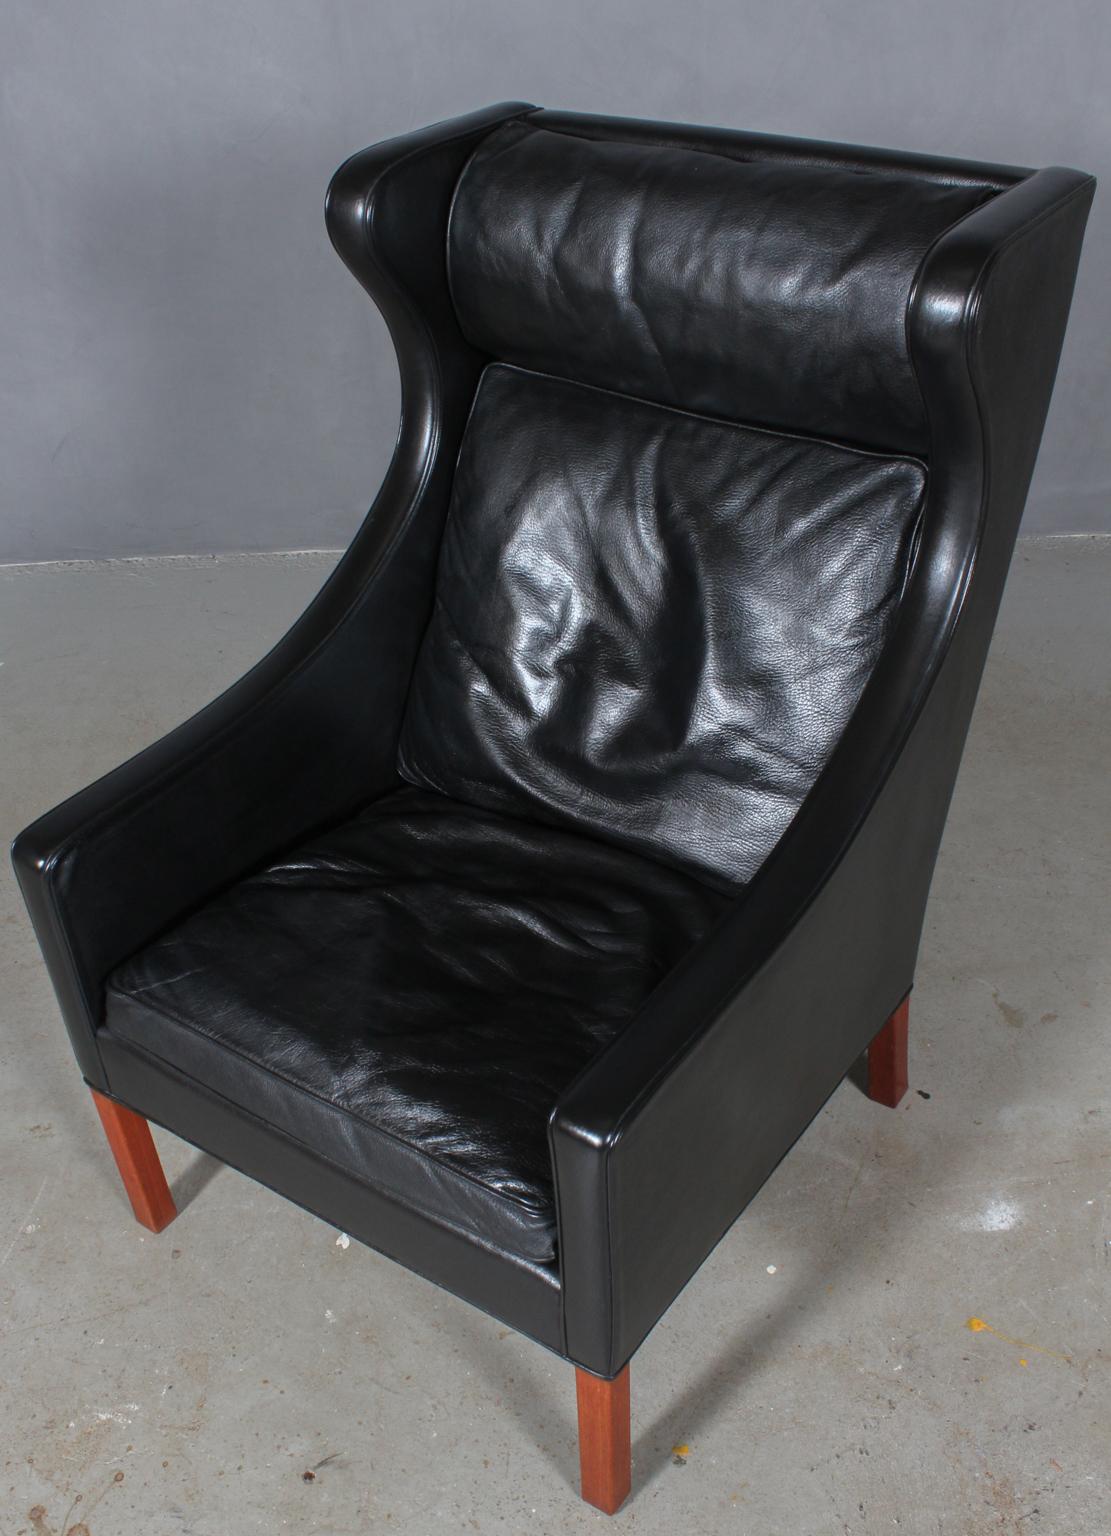 Børge Mogensen wingback chair in original black patinated leather upholstery.

Legs in mahogany.

Model 2204, made by Fredericia Furniture.